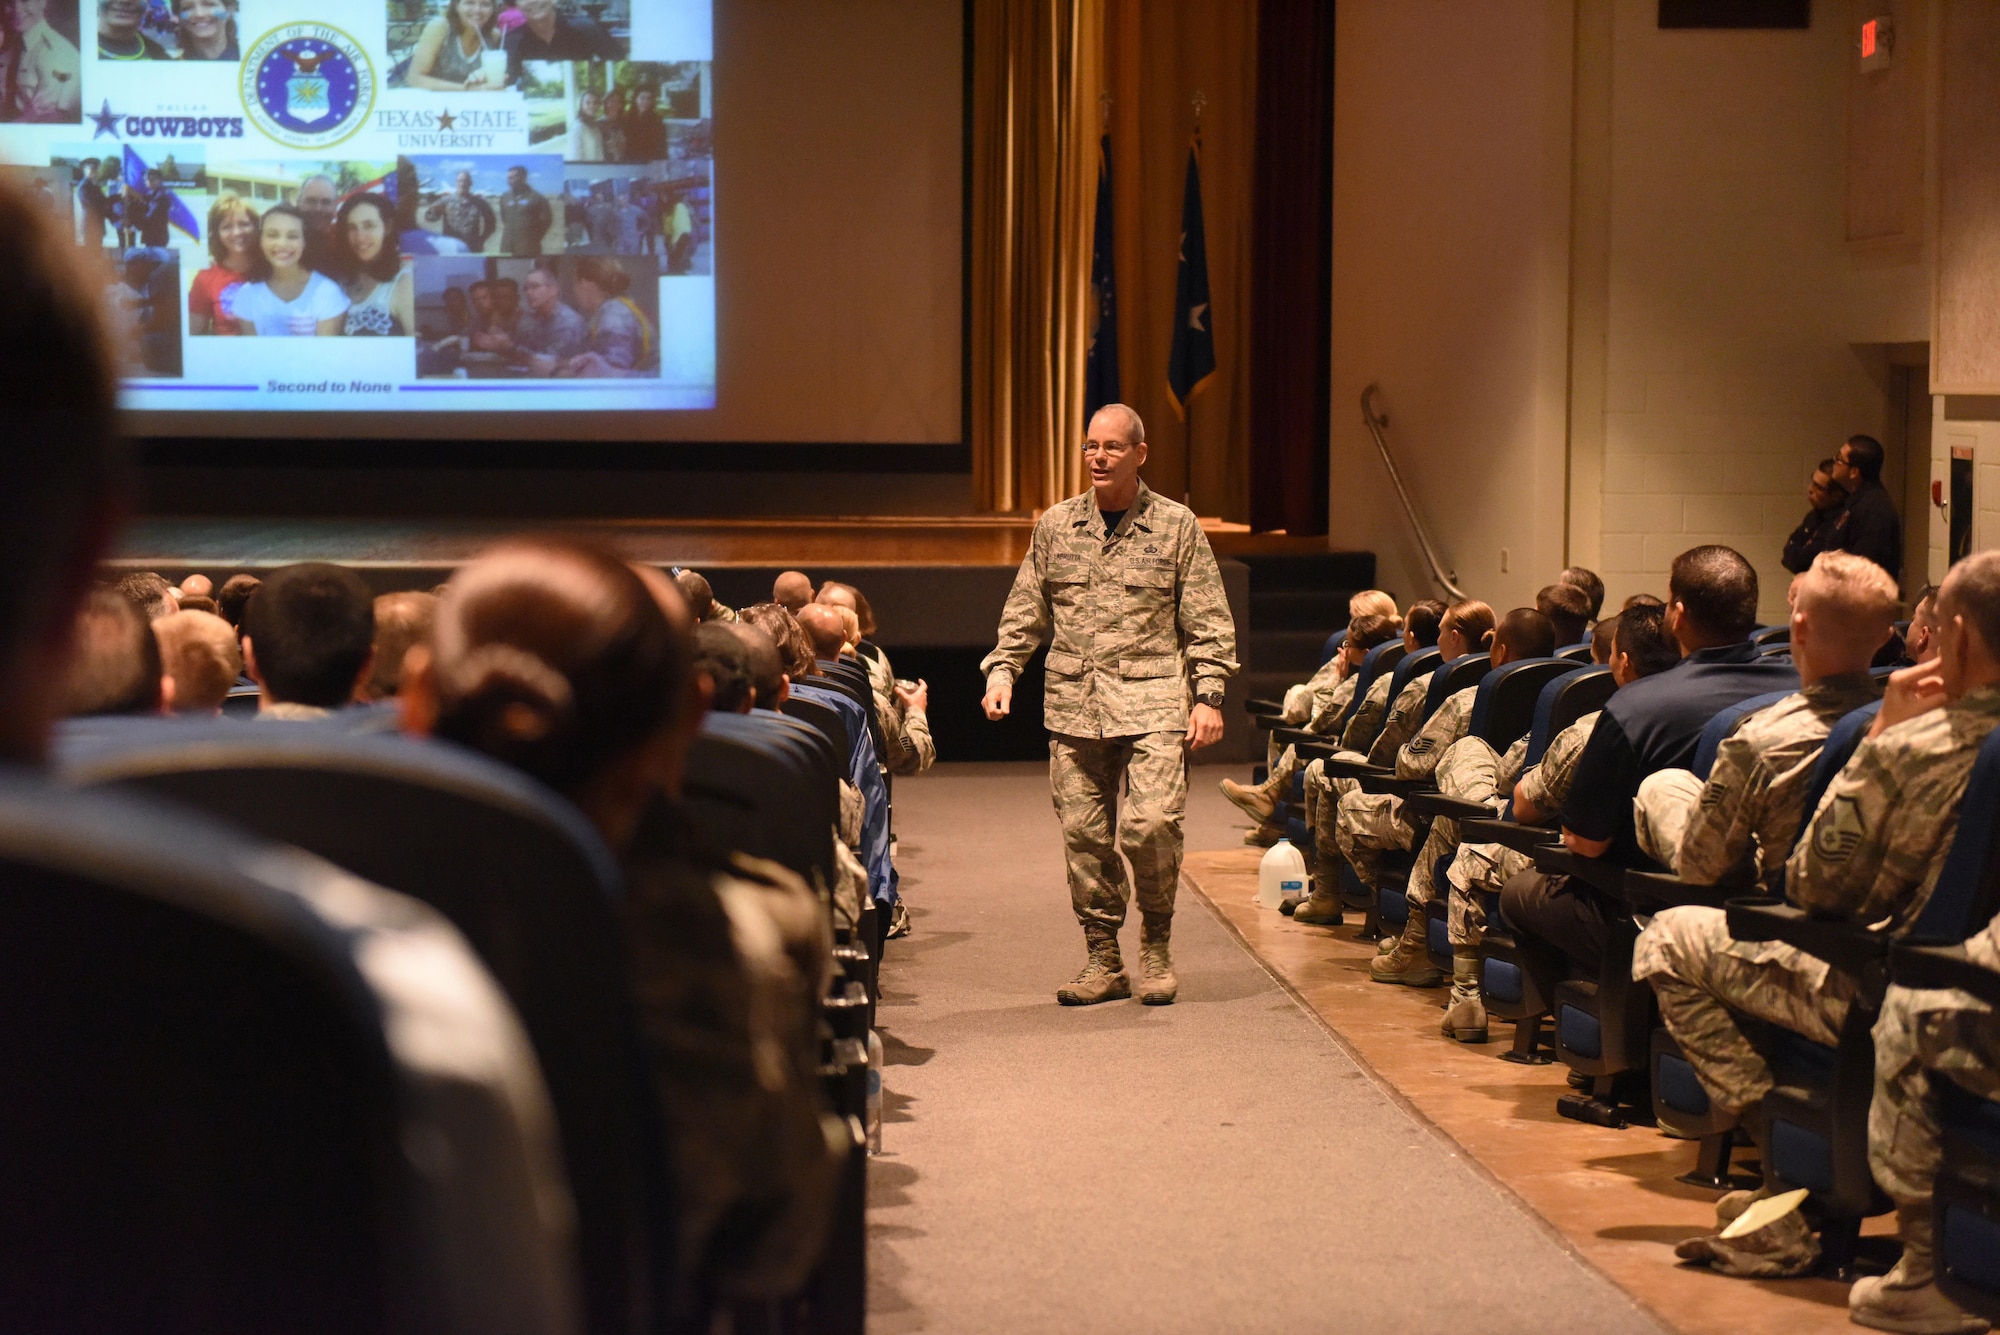 U.S. Air Force Maj. Gen. Bob LaBrutta, 2nd Air Force Commander, speaks during a commander's call at the base theater on Goodfellow Air Force Base, Texas, Oct. 7, 2016. Among several topics, LaBrutta spoke about how the Air Force needs to work together as a team. (U.S. Air Force photo by Airman 1st Class Chase Sousa/Released)